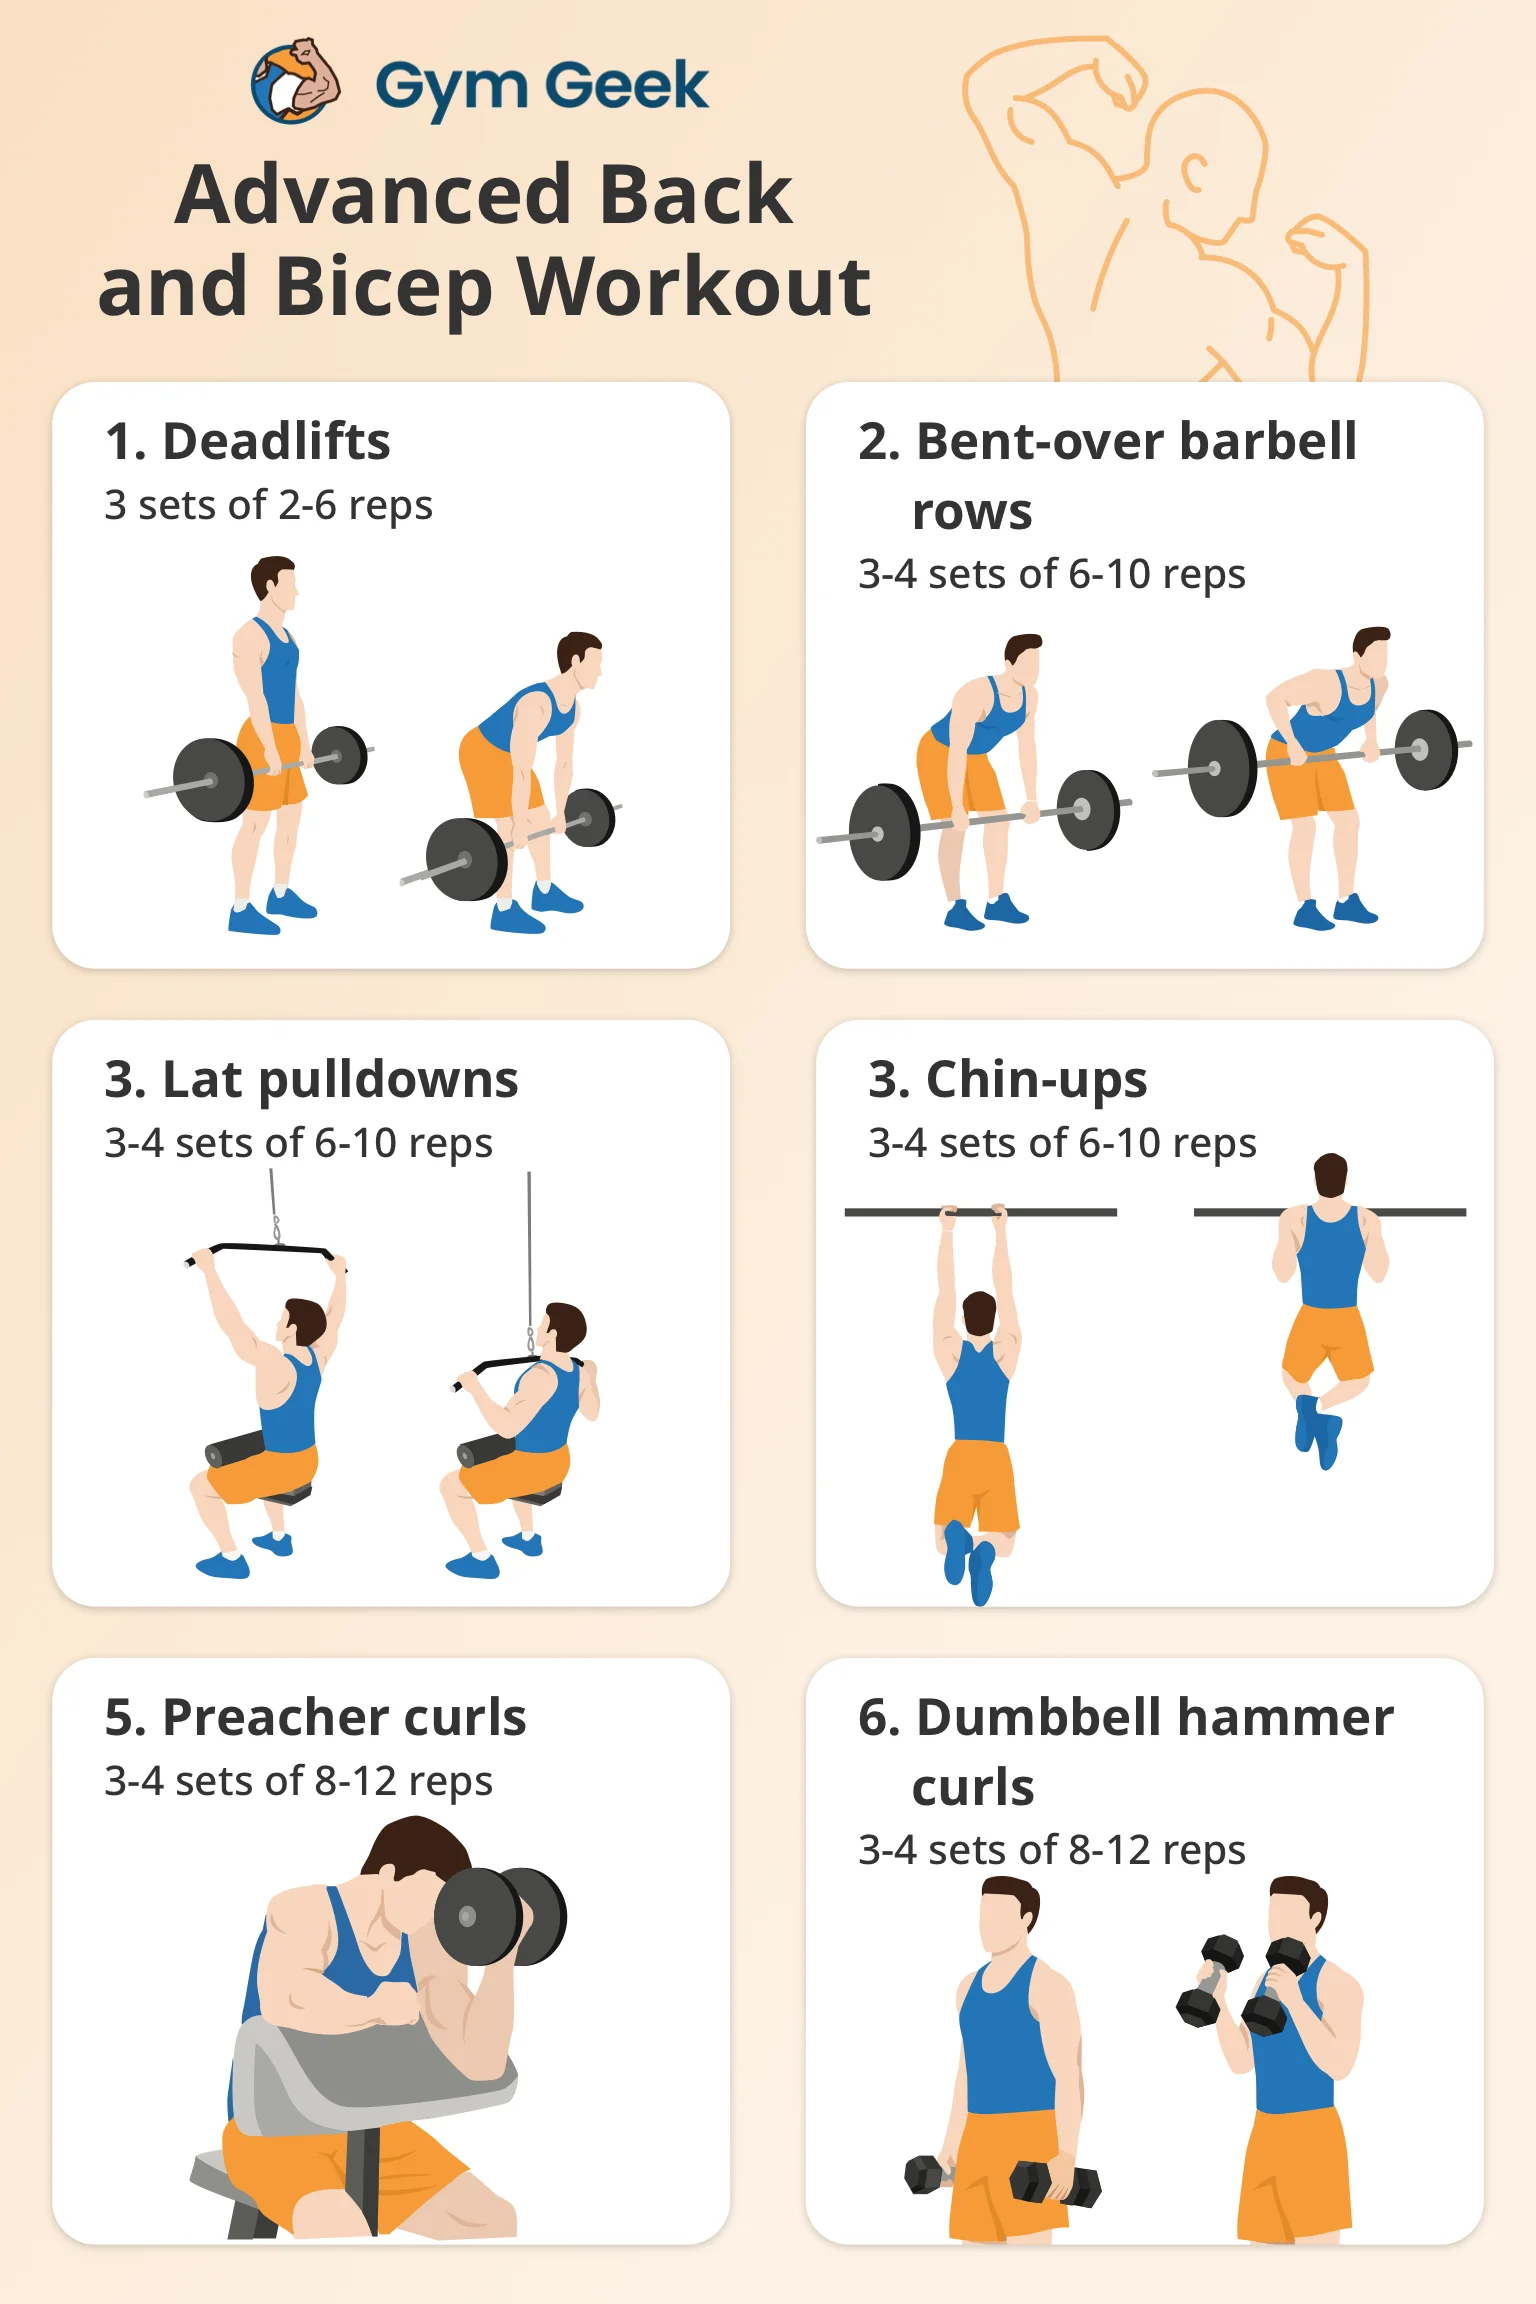 infographic - Advanced back and bicep workout routine (6 exercises)